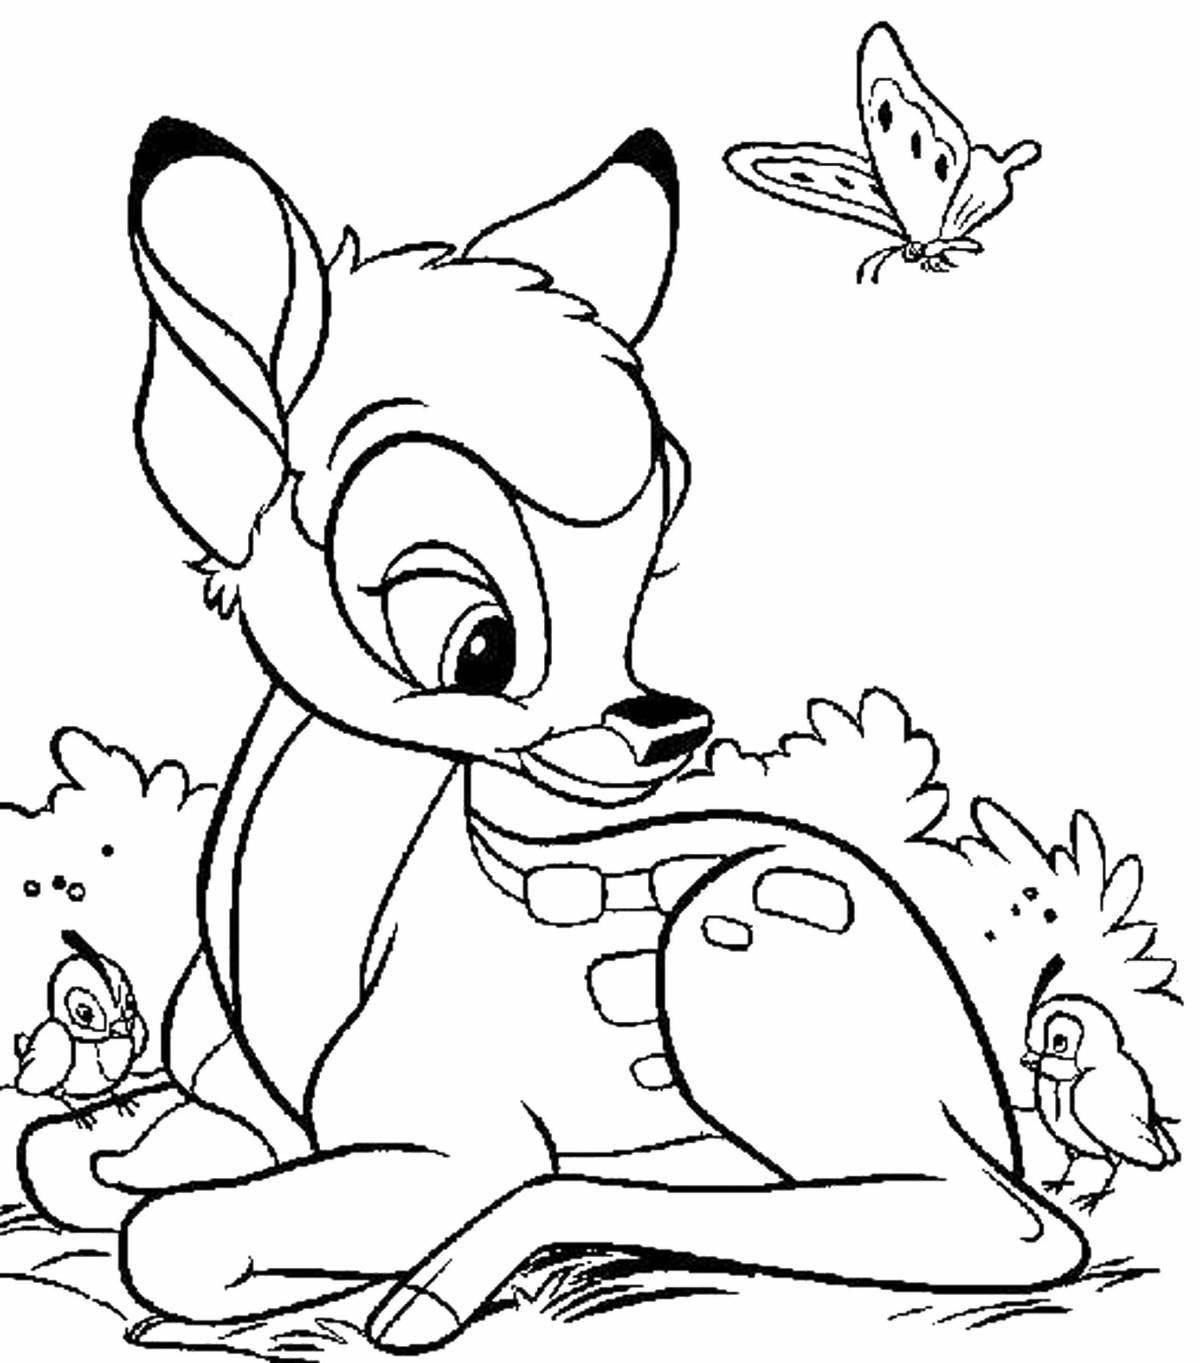 Fantastic cartoon coloring book for girls 6-7 years old